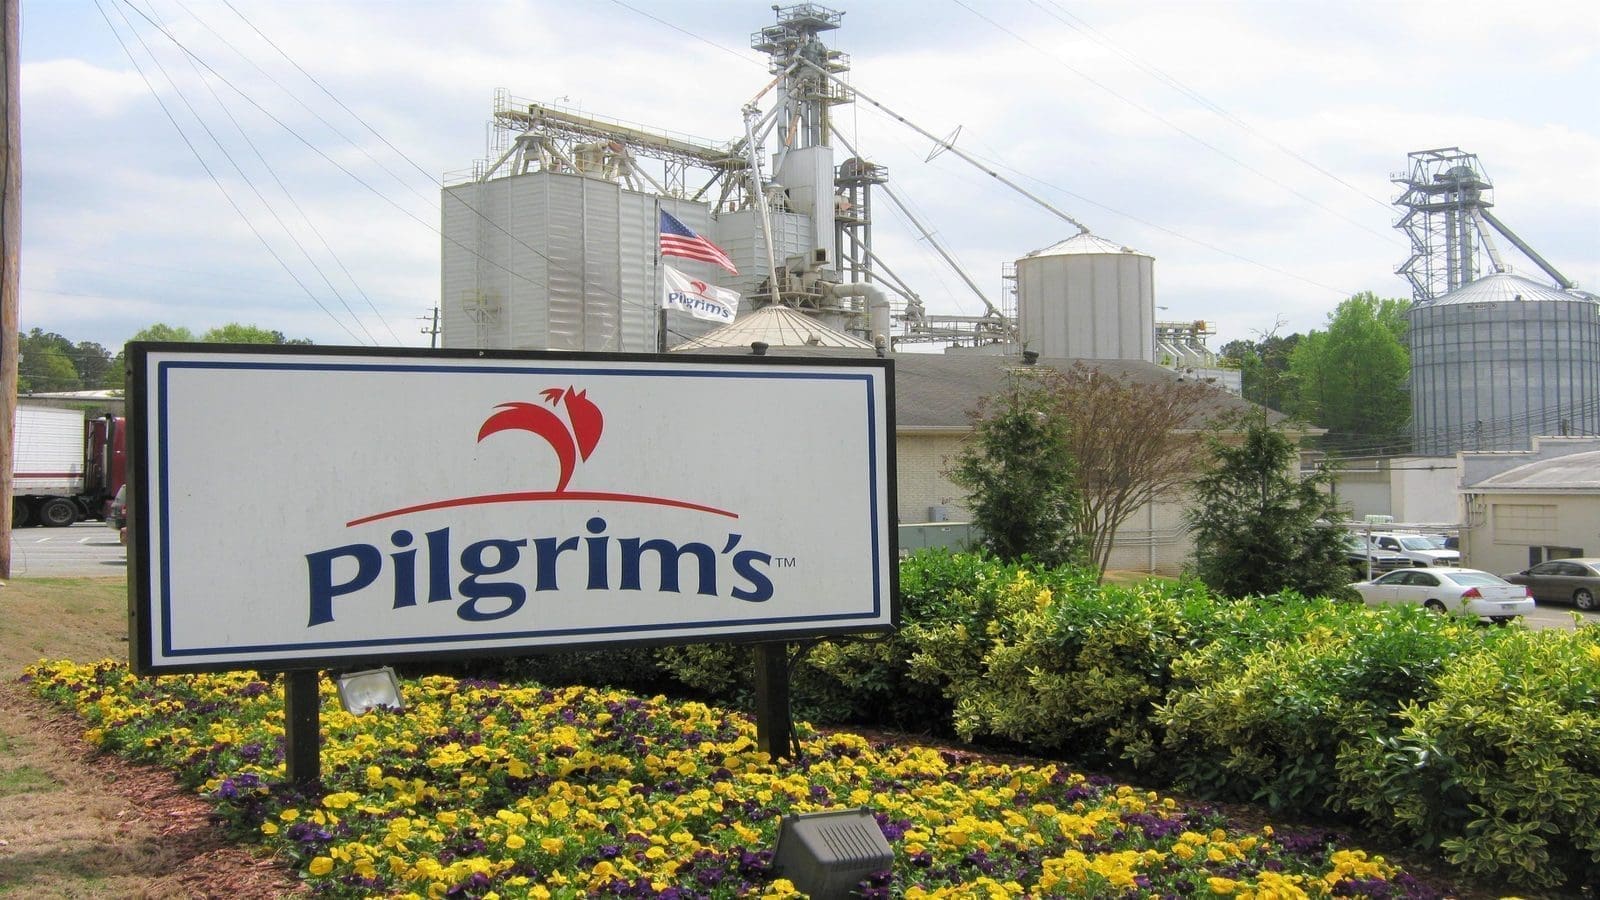 Pilgrim’s UK to close two of its factories as part of business revival strategy